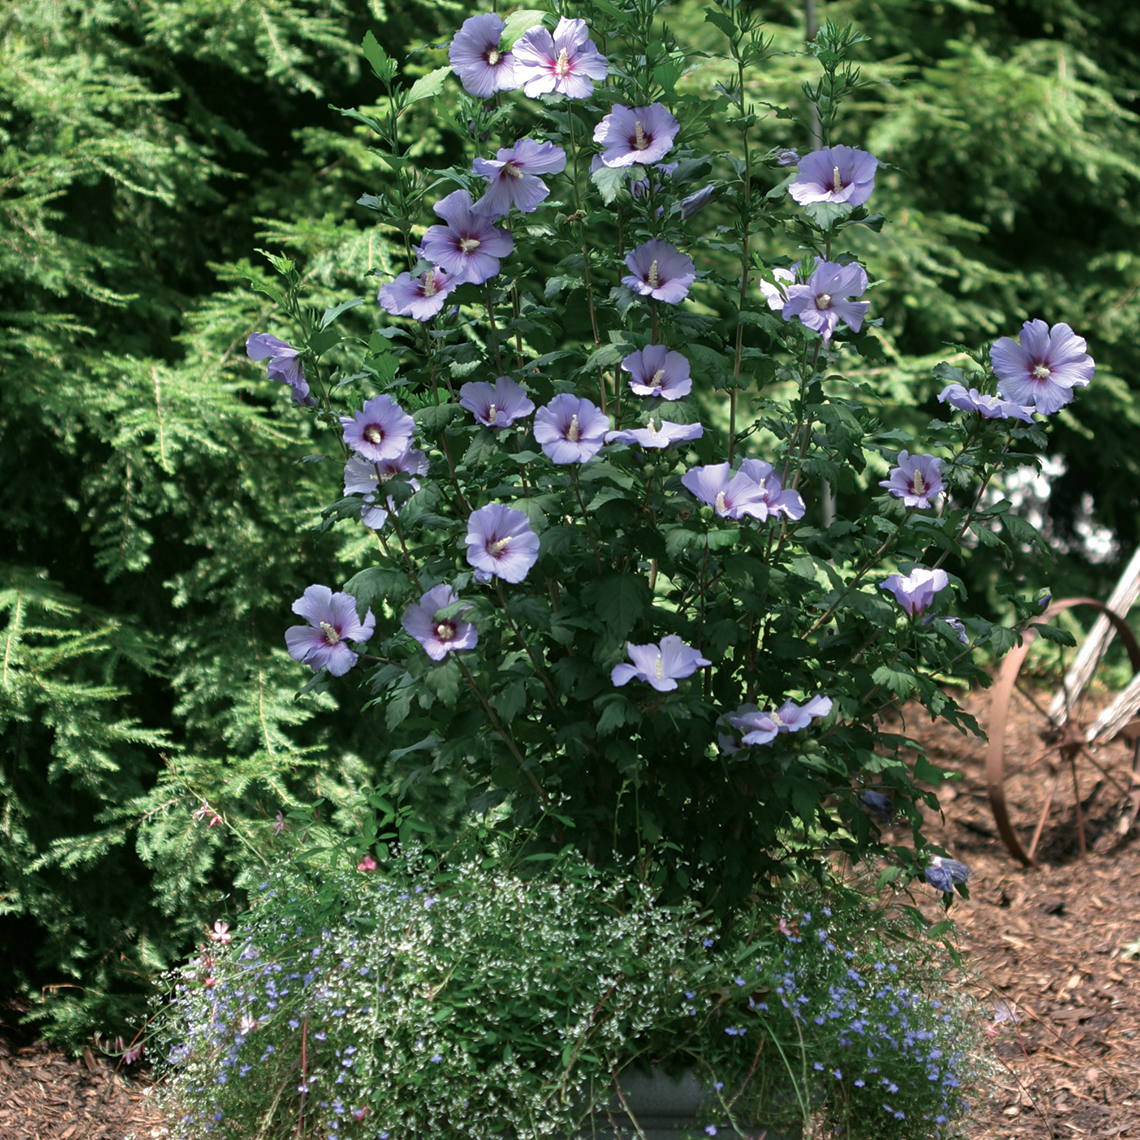 A medium sized specimen of Blue Satin rose of Sharon planted in a large decorative container